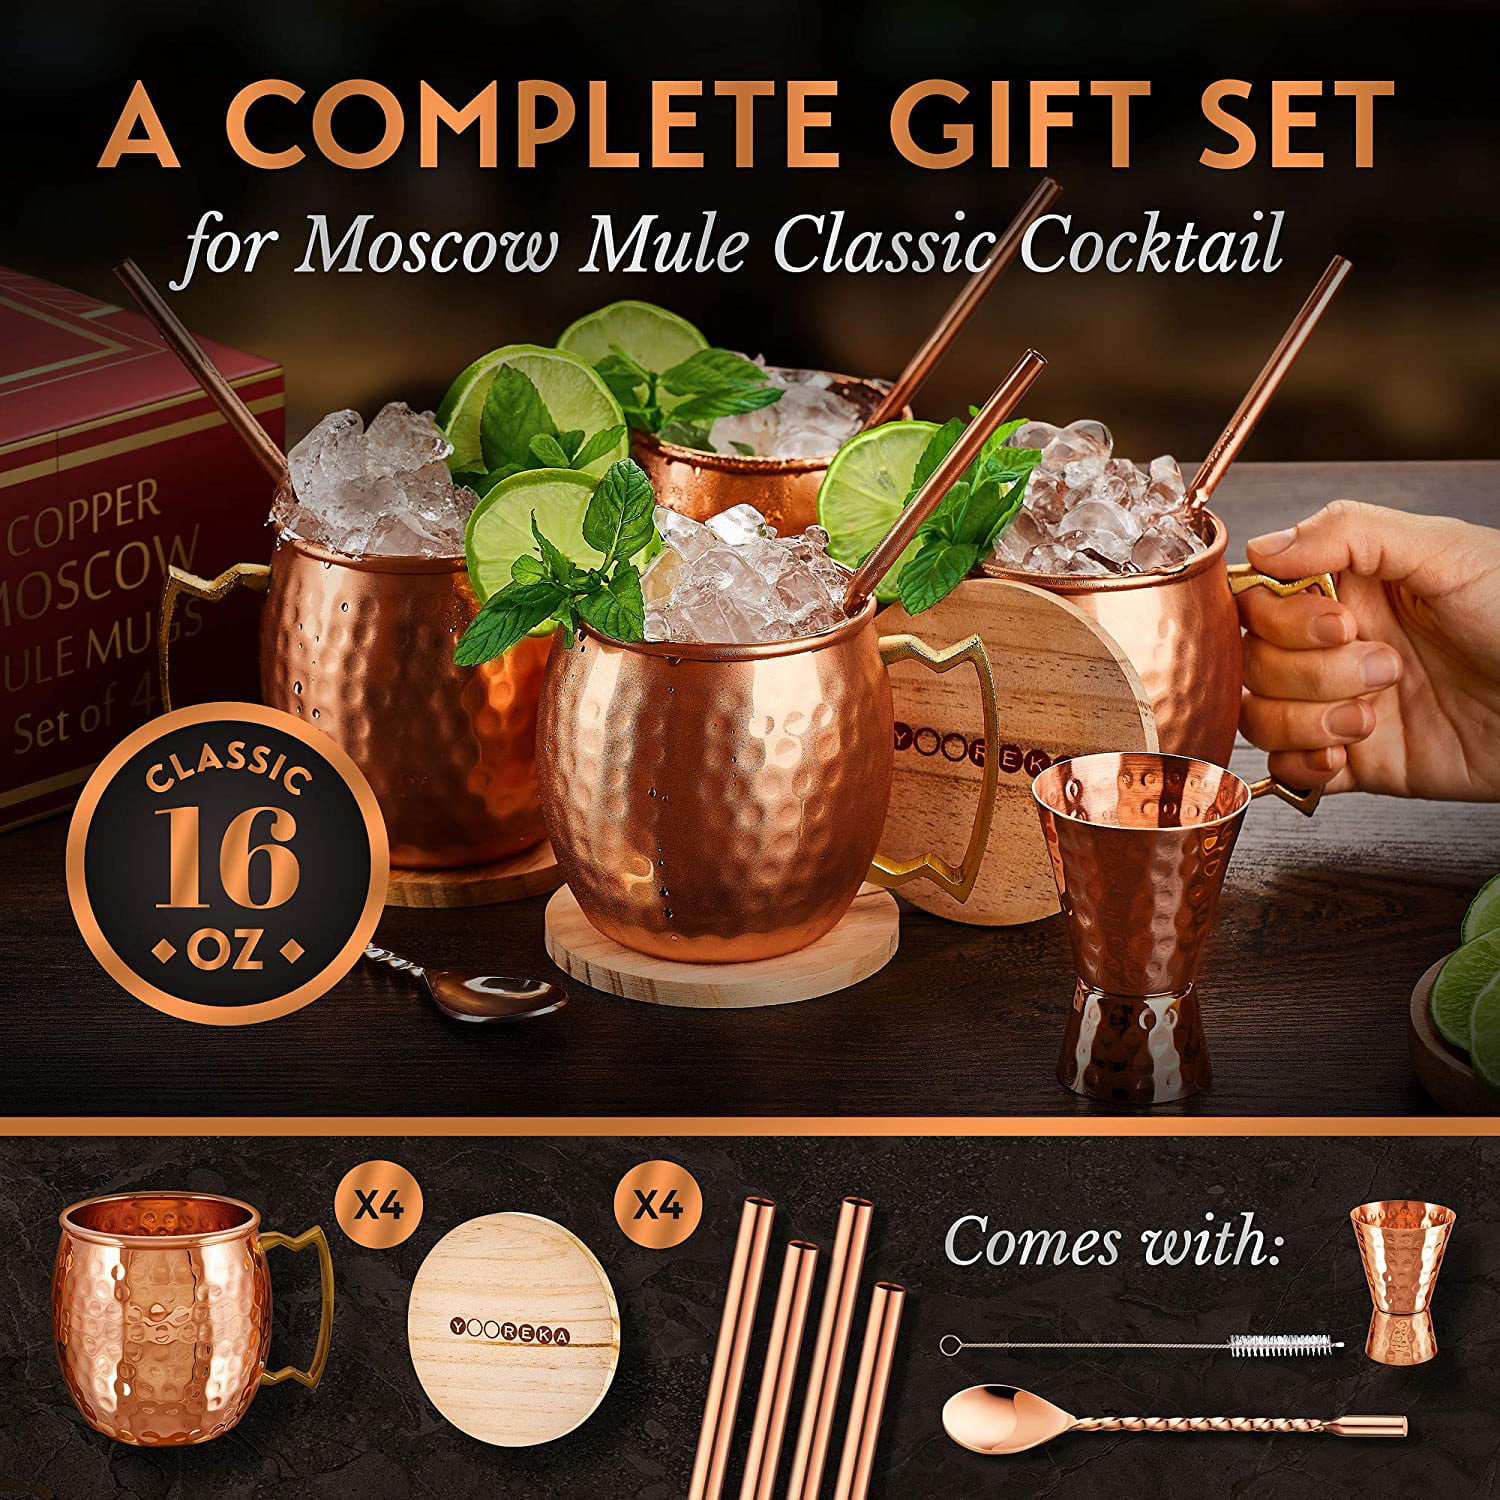 Set of 4-16 oz Cups with Cocktail Straws Stirring Spoon Coasters and Bottle Pack of 12 Pieces! Copper Tank Moscow Mule Copper Mugs